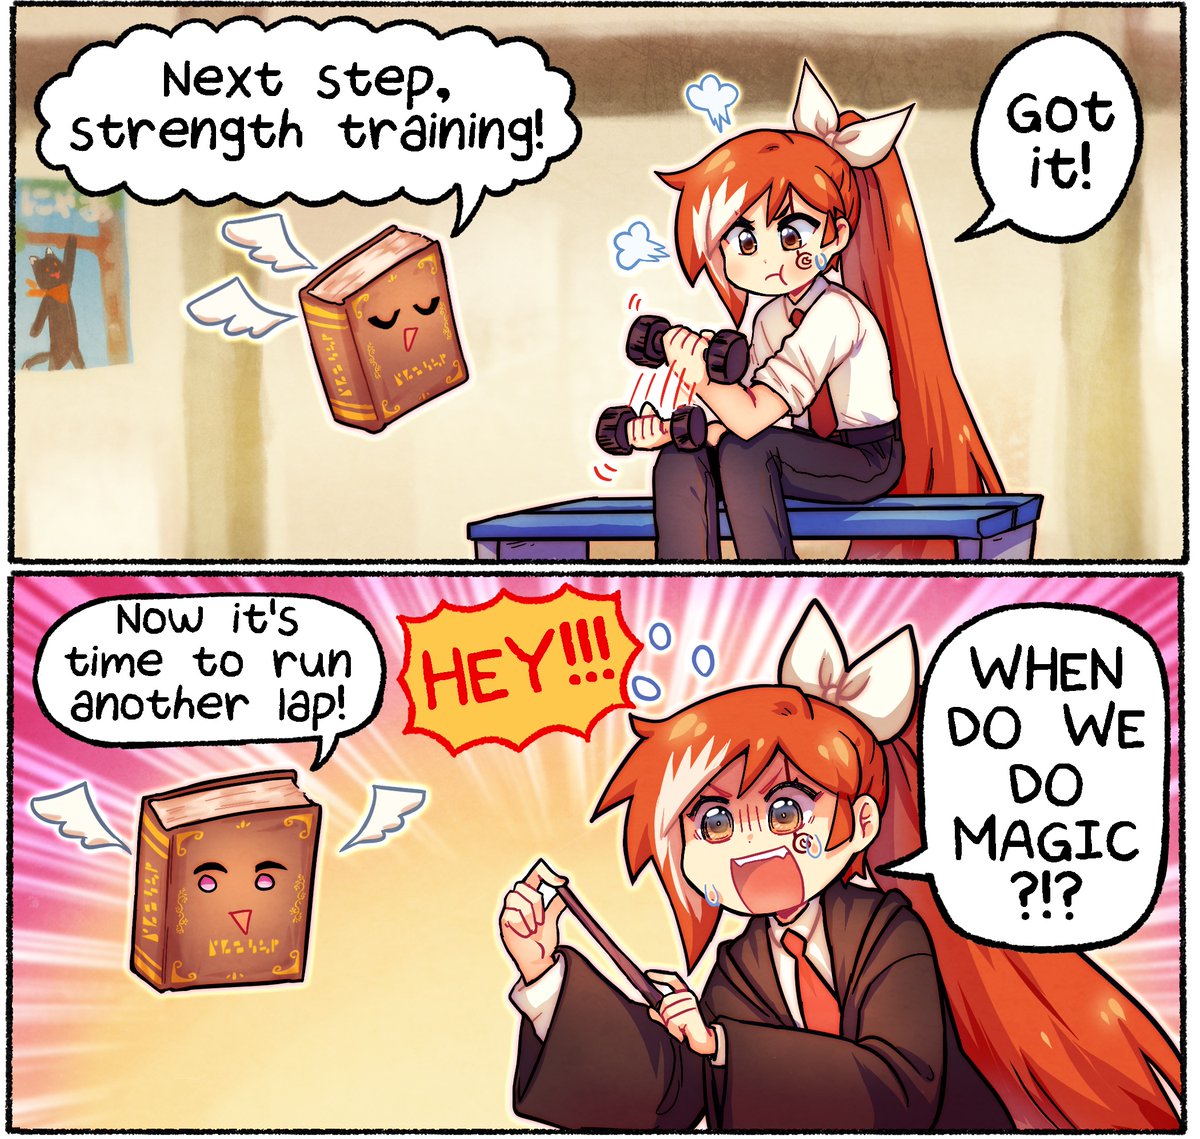 In this week's The Daily Life of Crunchyroll-Hime (by @coughdrops) ⚔️ Hime learns magic takes a lot of strength 💪✨